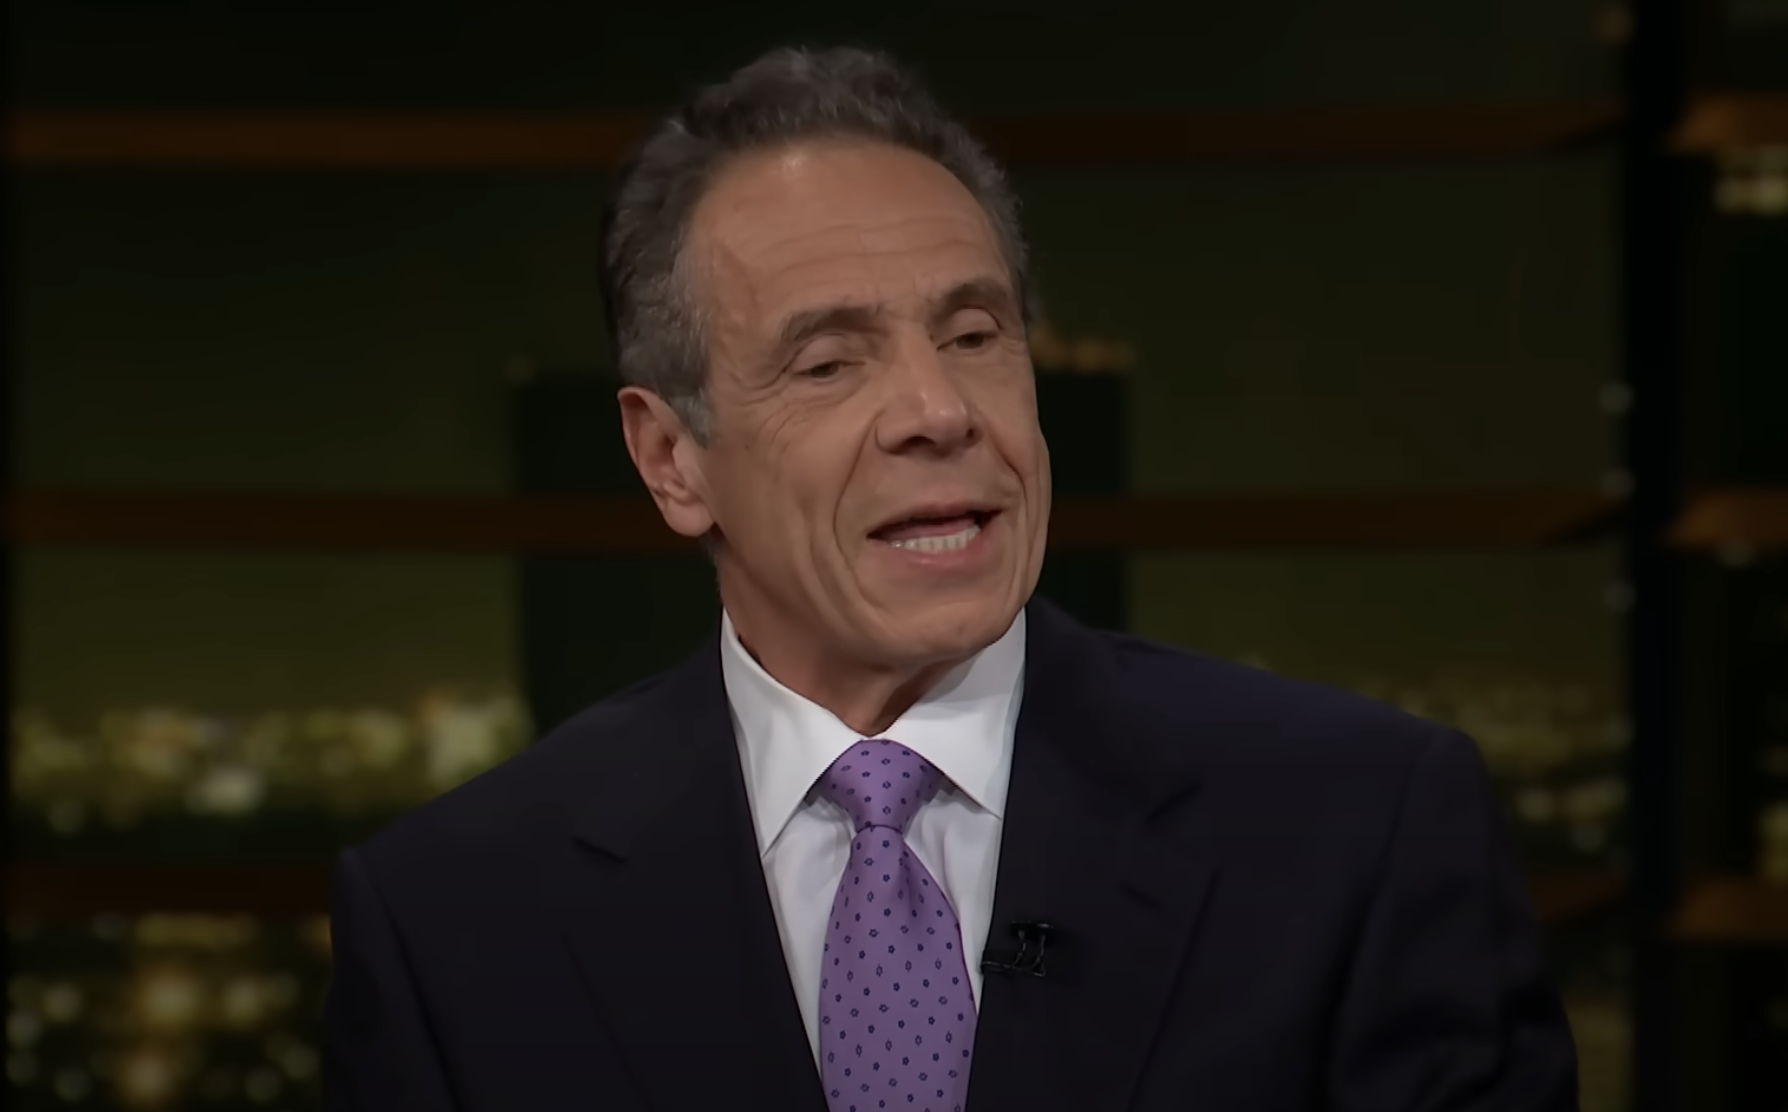 Andrew Cuomo: The AG's Case In New York "Should Have Never Been Brought" Against Trump